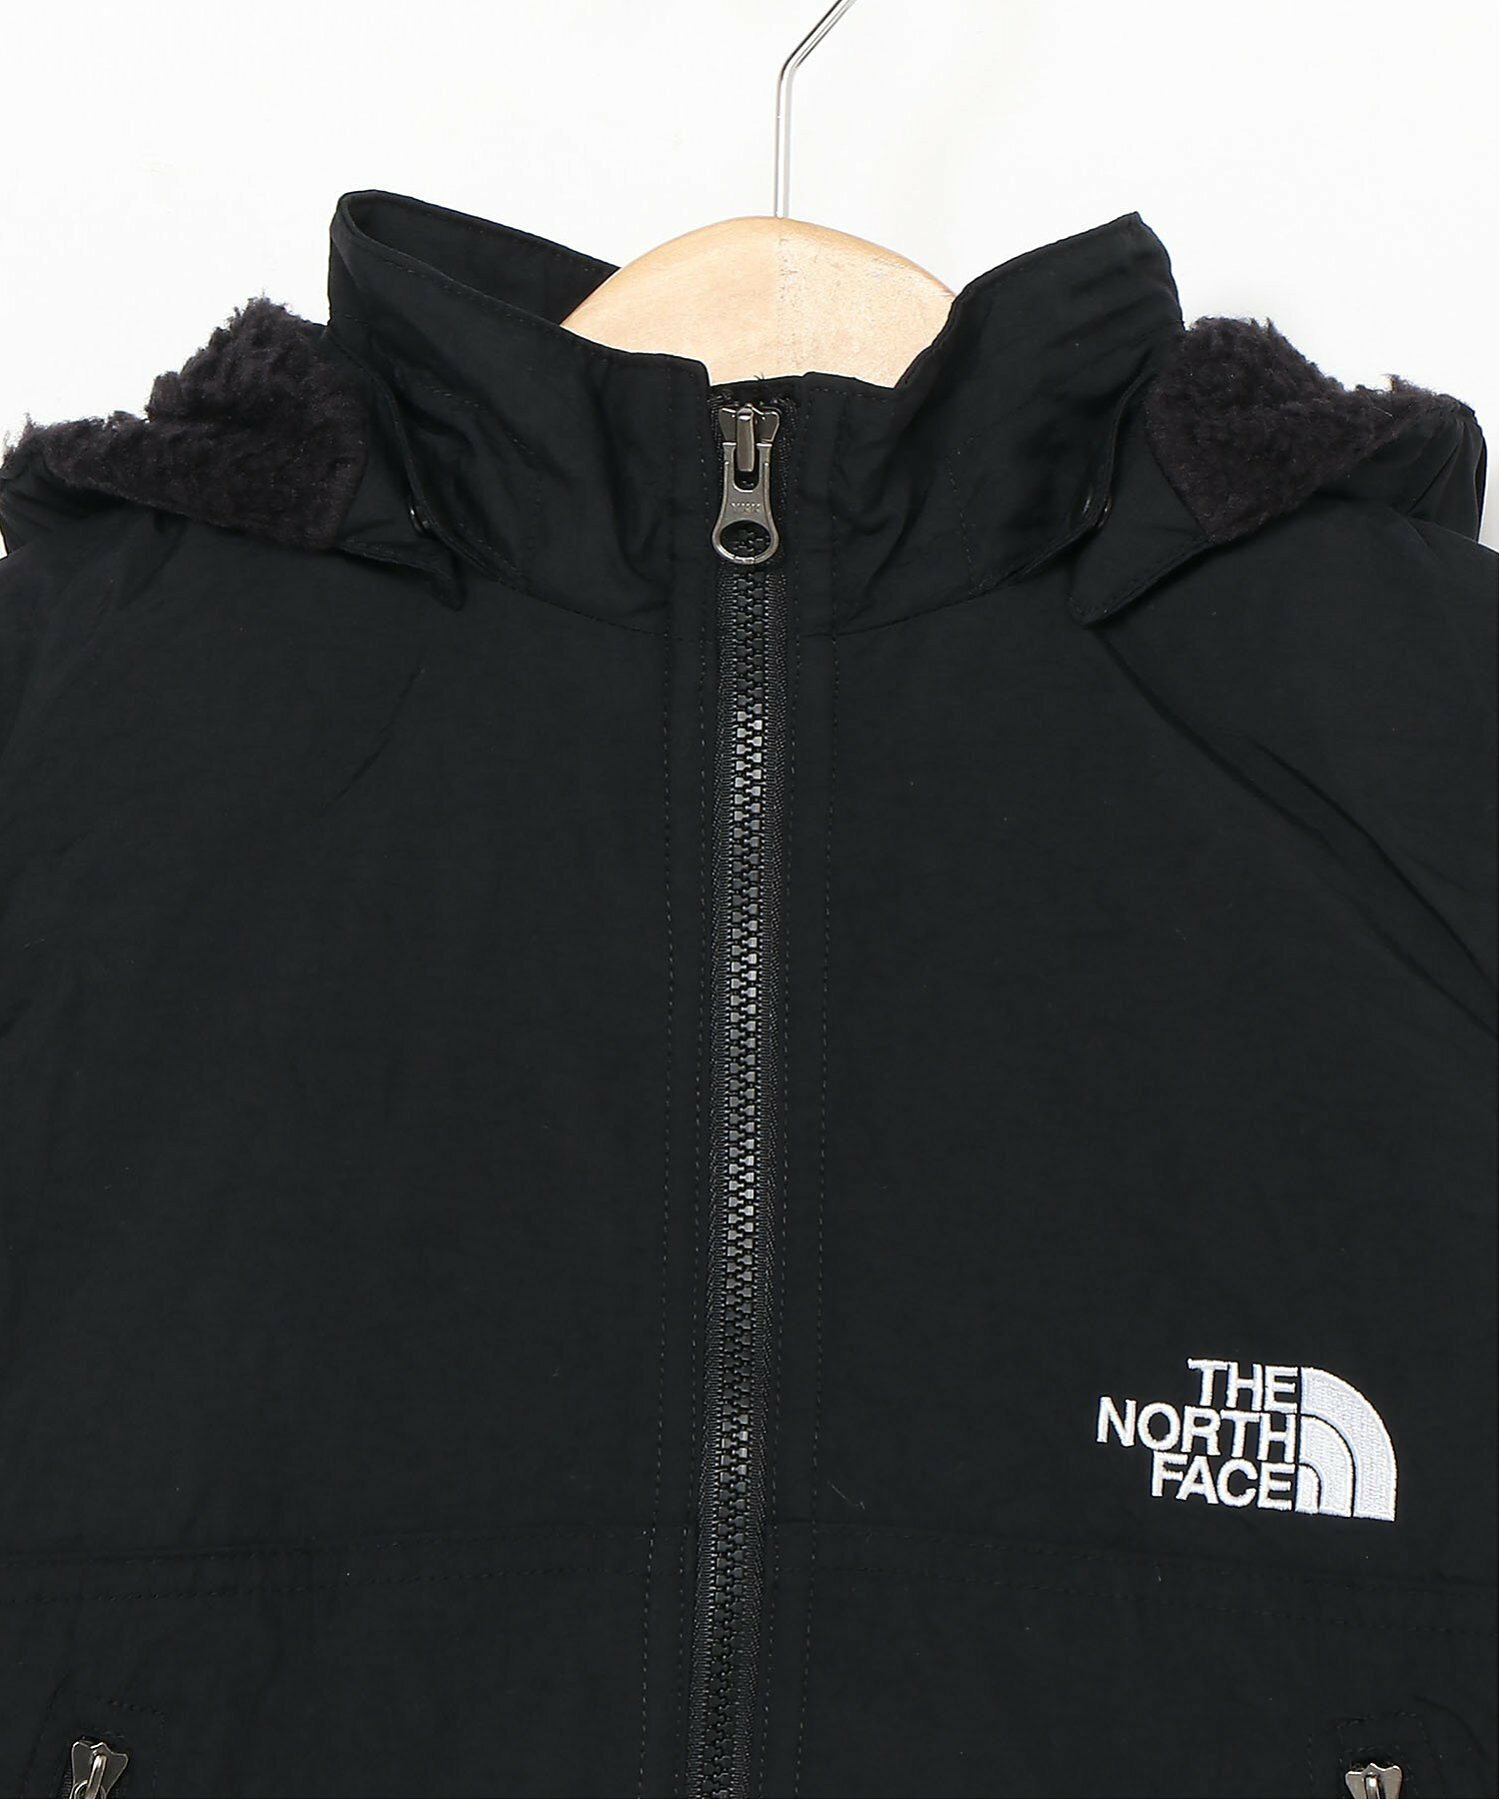 THE NORTH FACE/NPJ72257 コンパクトノマドジャケット